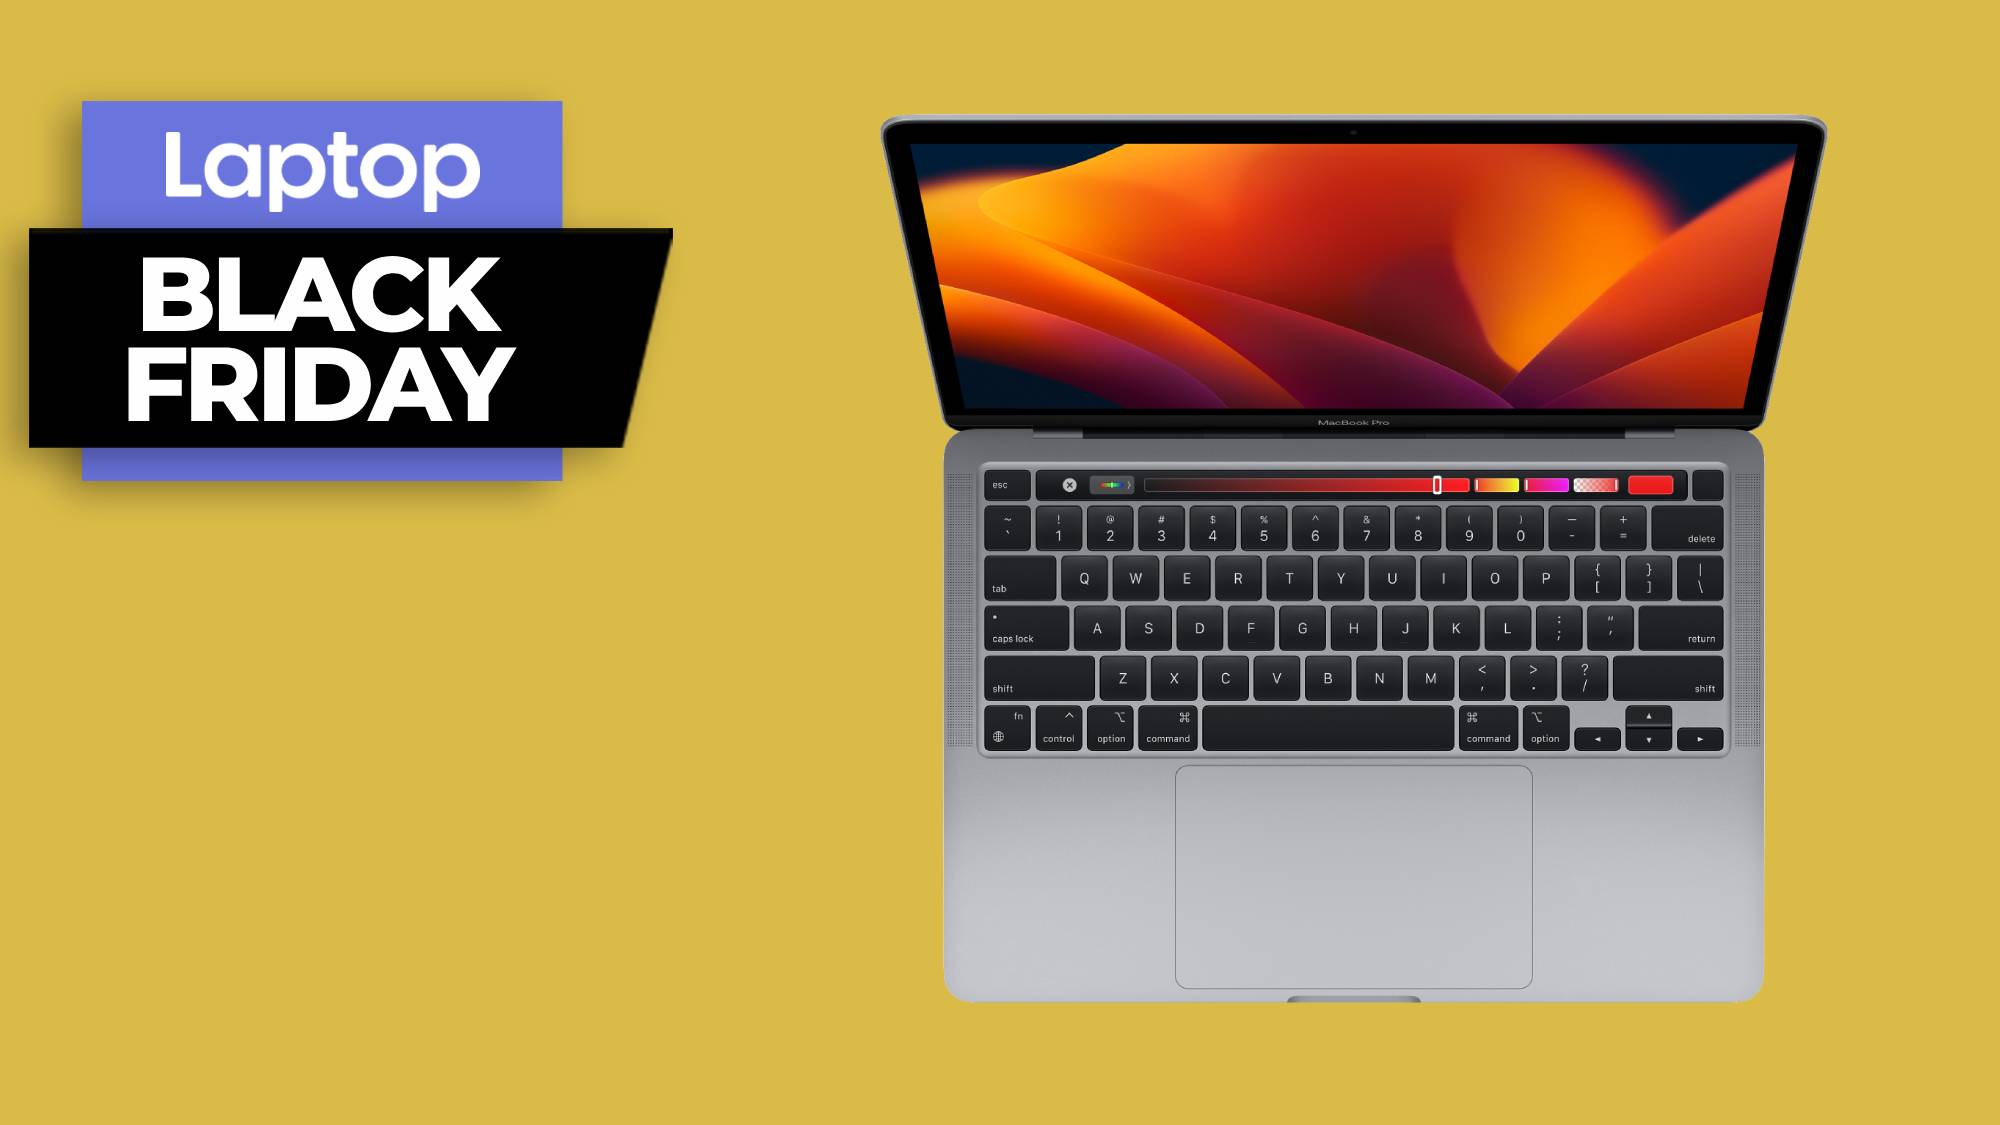 Macbook Black Friday deals against a gold background